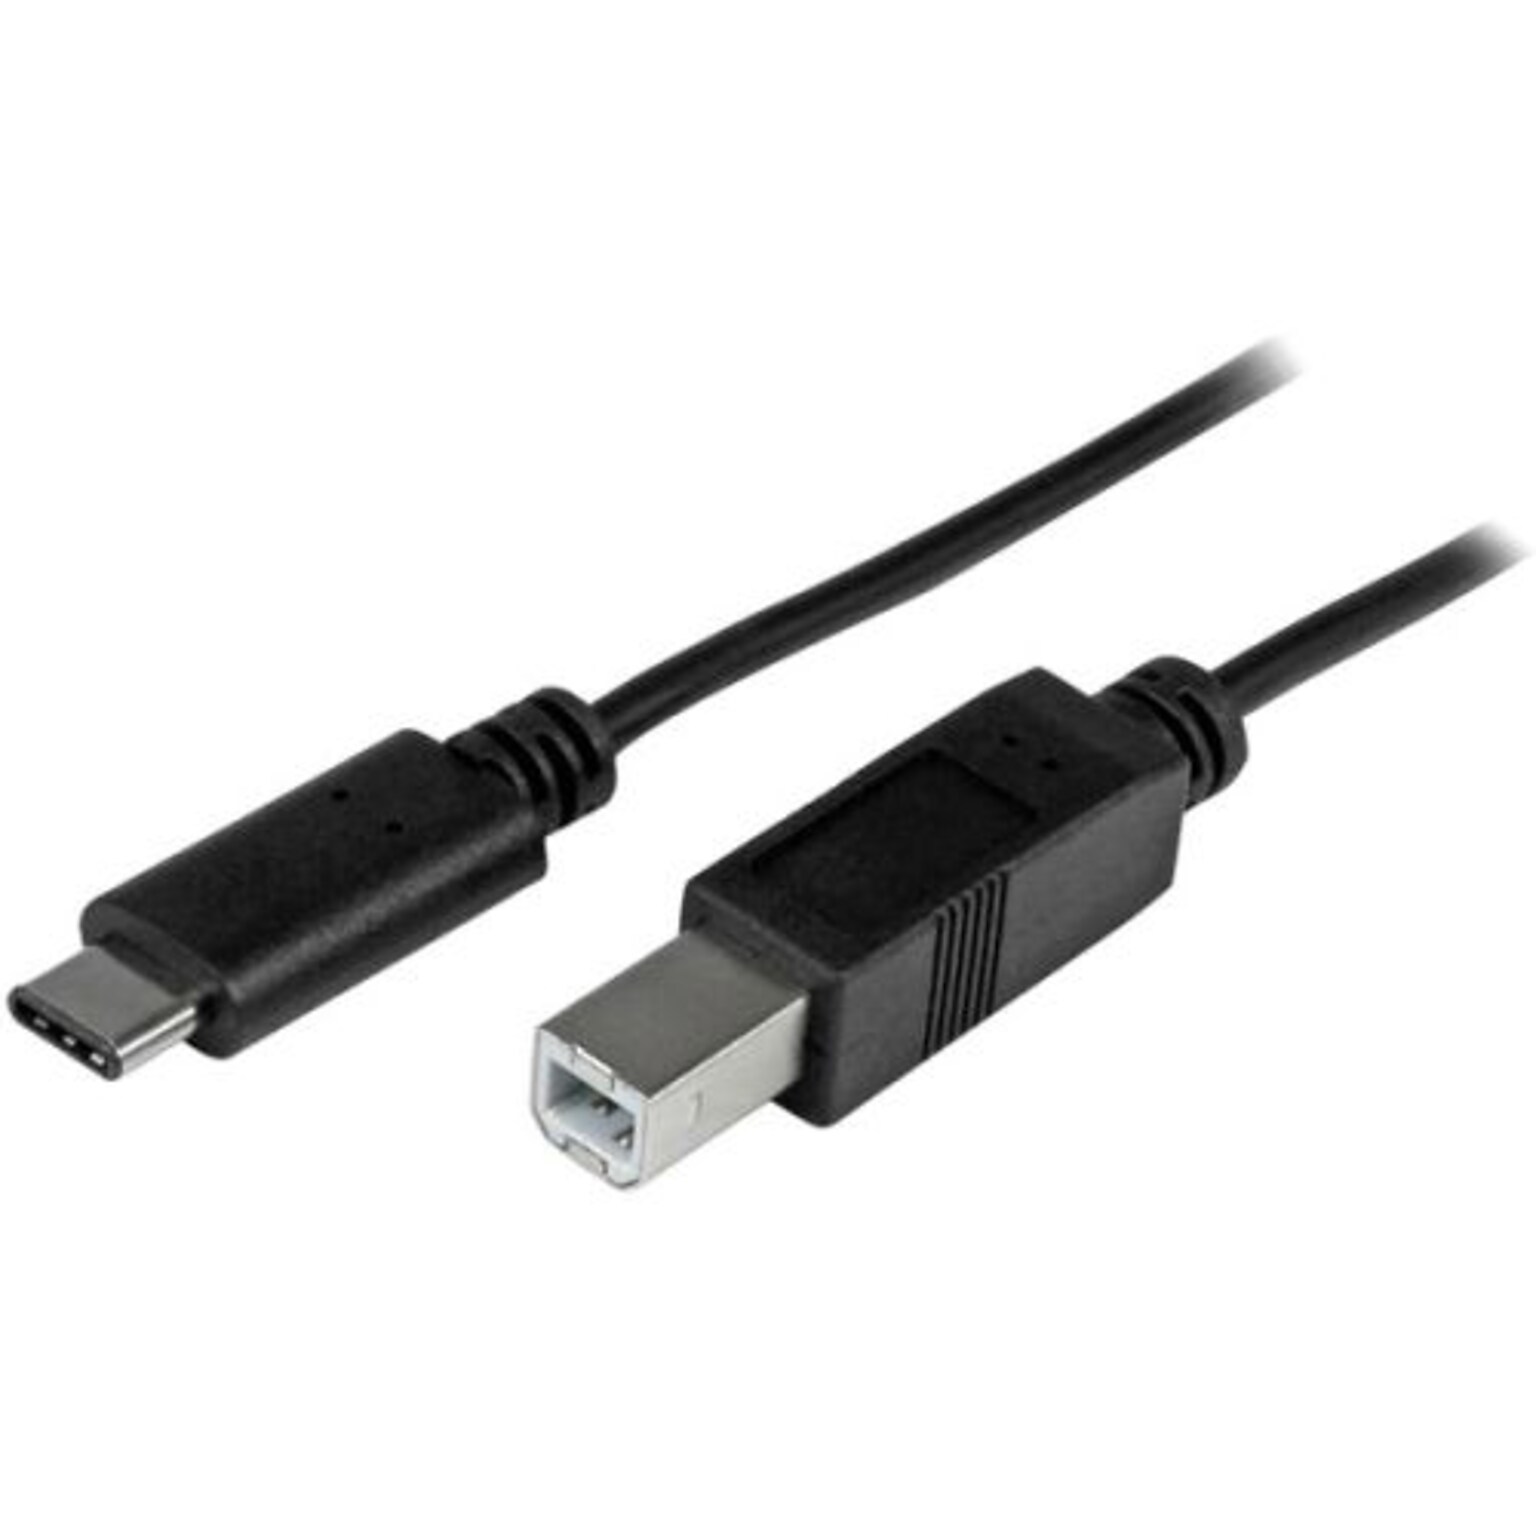 StarTech 3.3 USB 2.0 C to USB 2.0 B Male to Male Cable, Black (USB2CB1M)